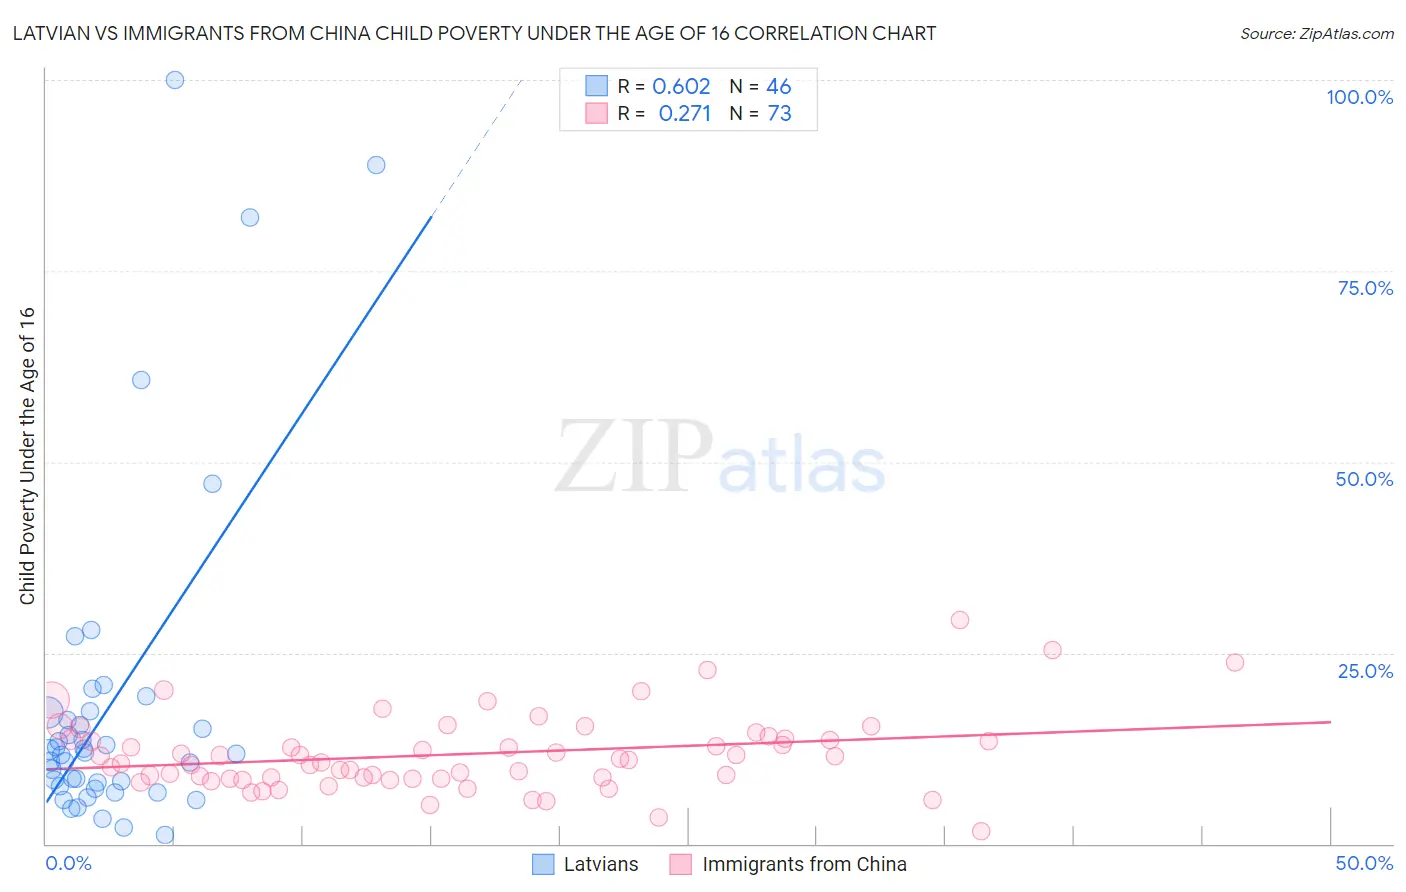 Latvian vs Immigrants from China Child Poverty Under the Age of 16